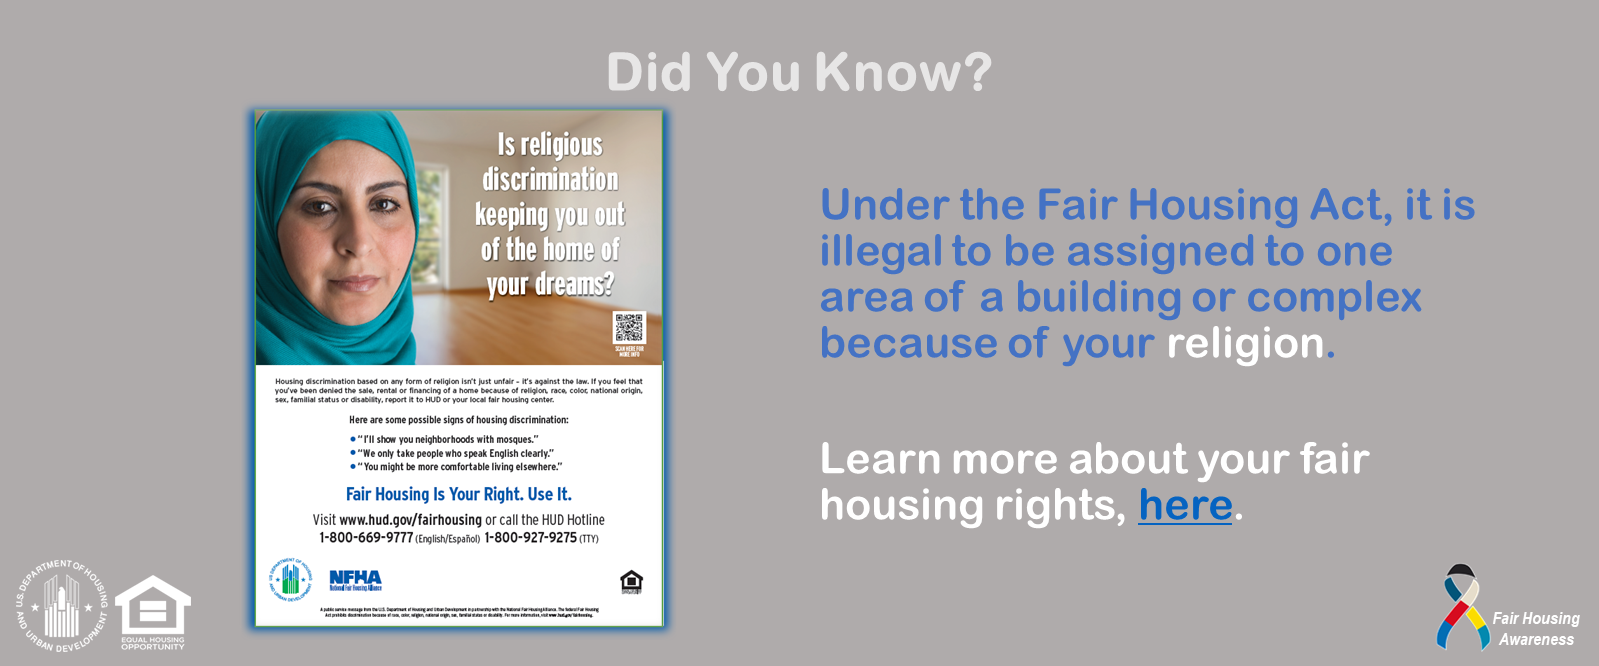 [Under the Fair Housing Act, it is illegal to be assigned to one area of a building or complex because of your religion.]. HUD photo